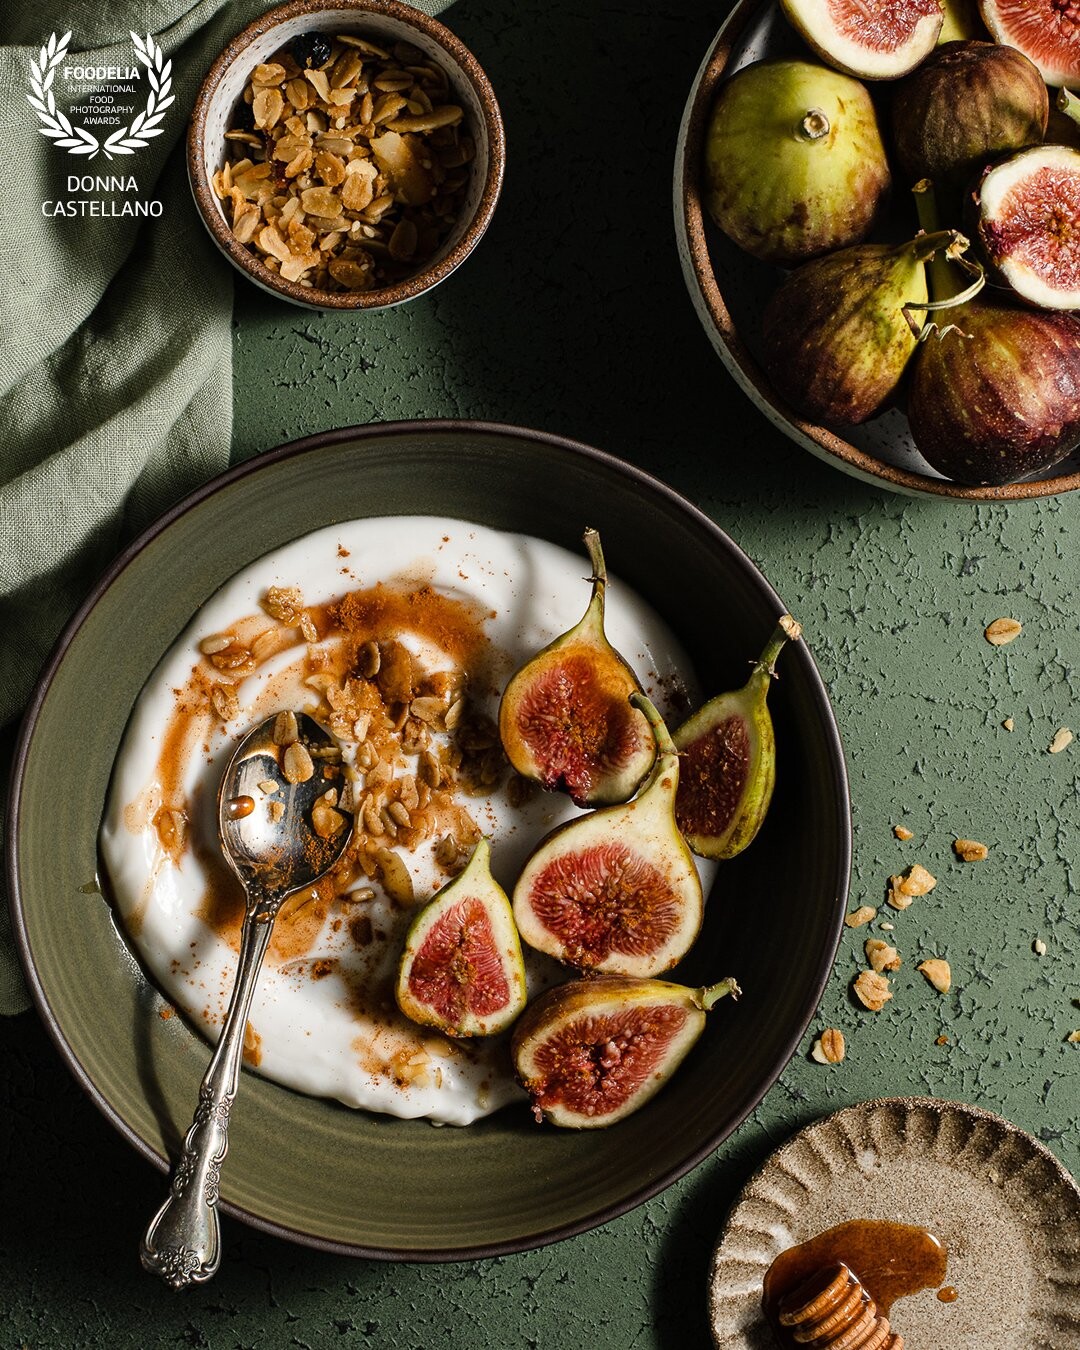 As summer transitions to fall,  this nourishing bowl of Coconut Yogurt with Figs, Granola & Spiced Honey is the perfect breakfast. The warm spices, seasonal flavors and textures will have you running to the kitchen in the morning!